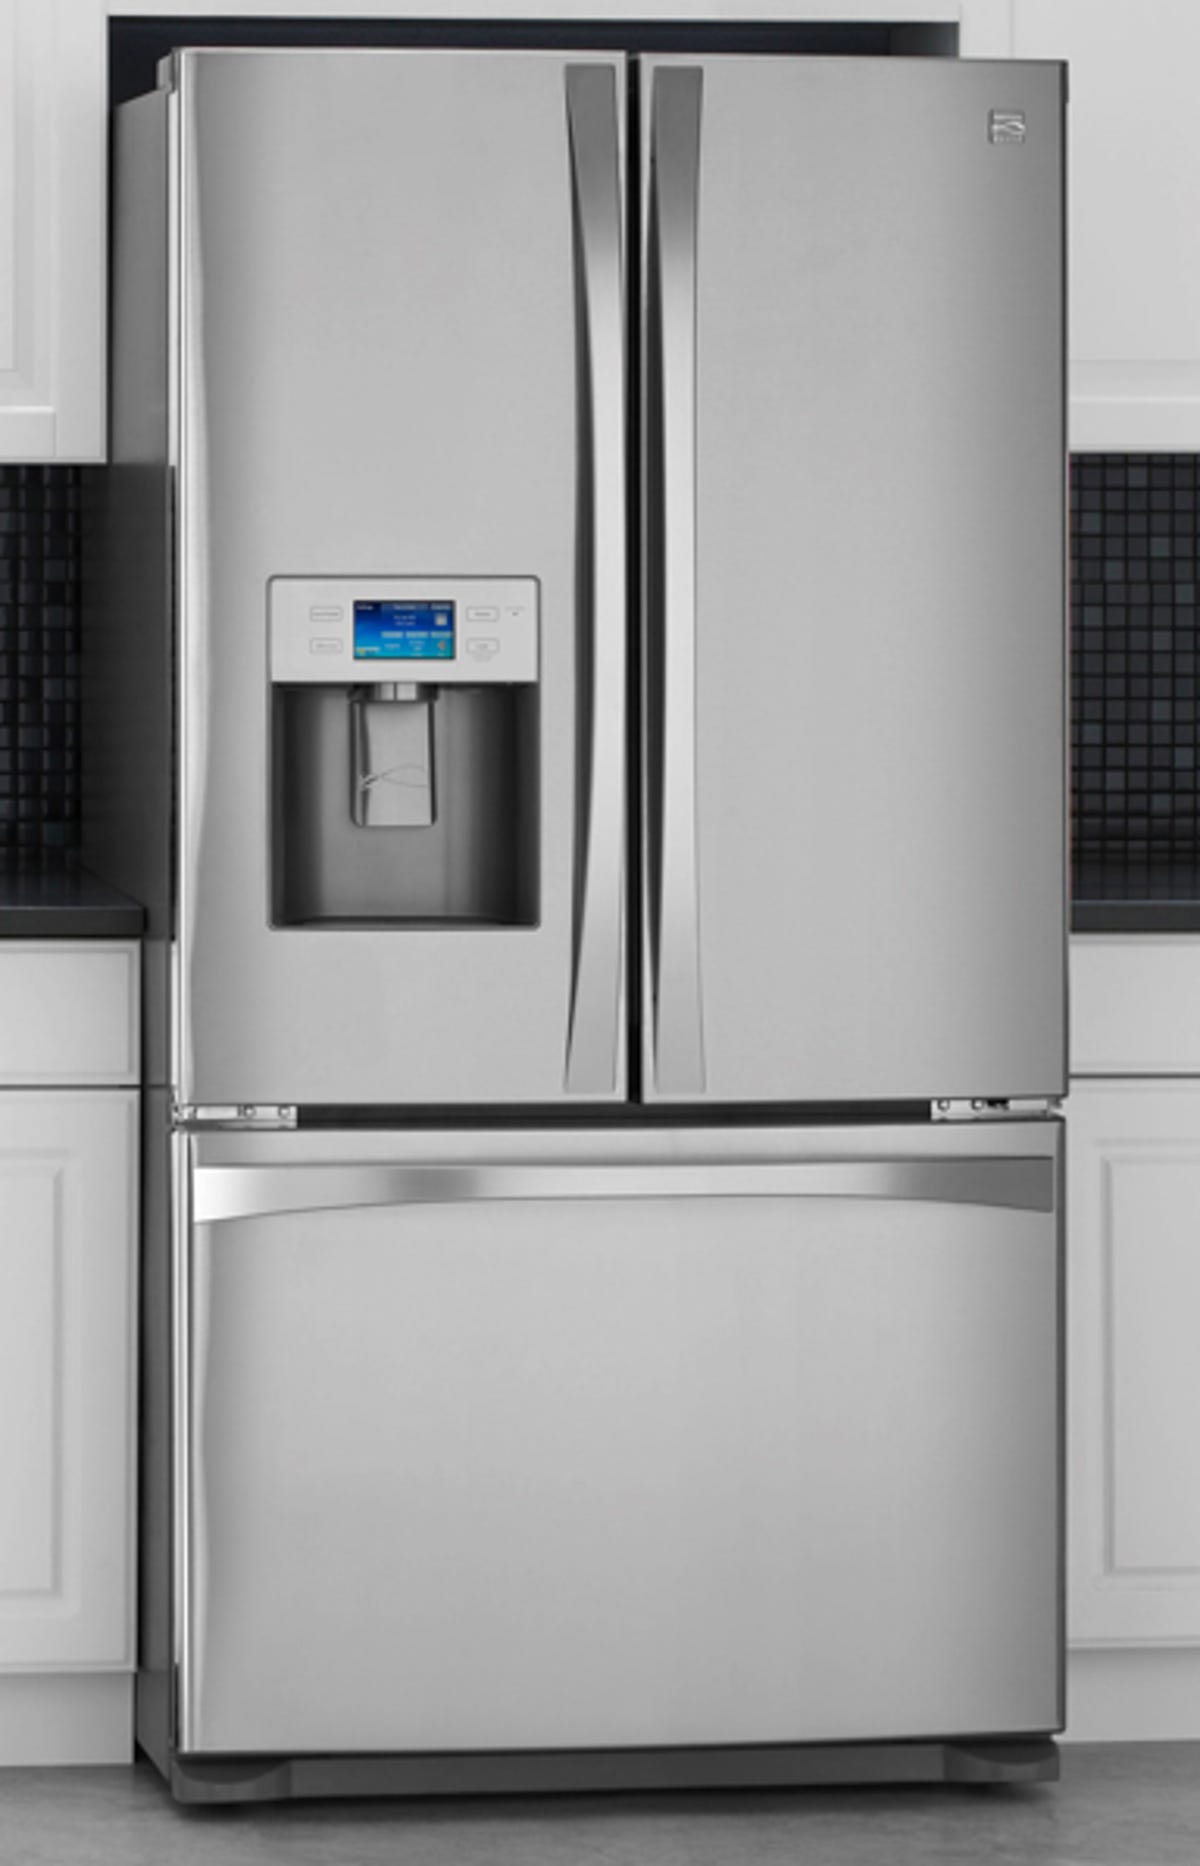 The 2010 Kenmore refrigerators feature smooth styling and a large capacity.